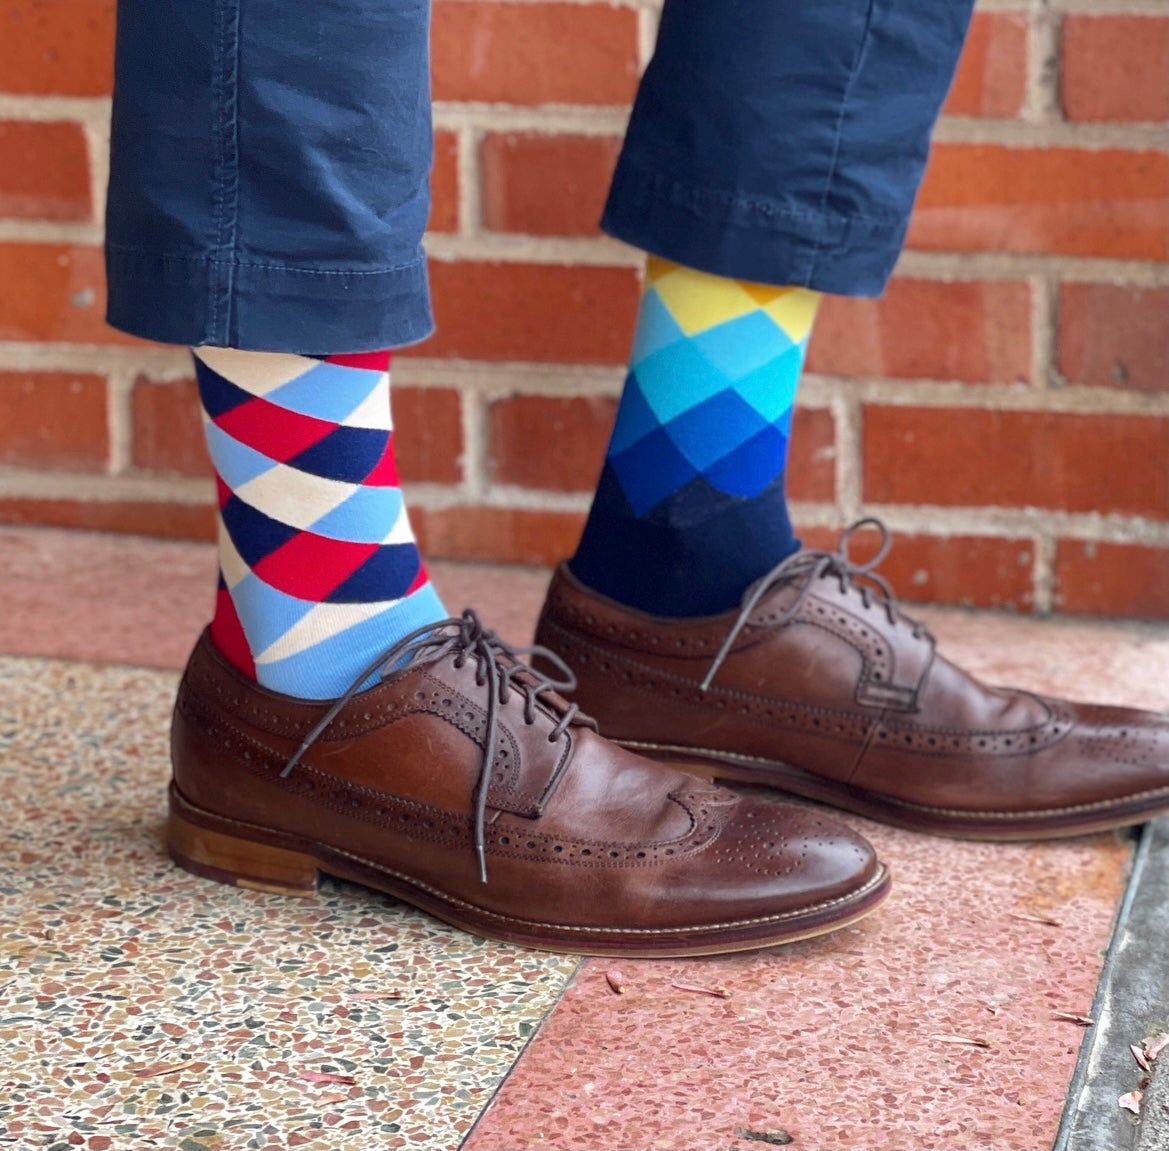 Wearing Mismatched Socks Can Change Your Life. And Someone Else's - Bisoxual